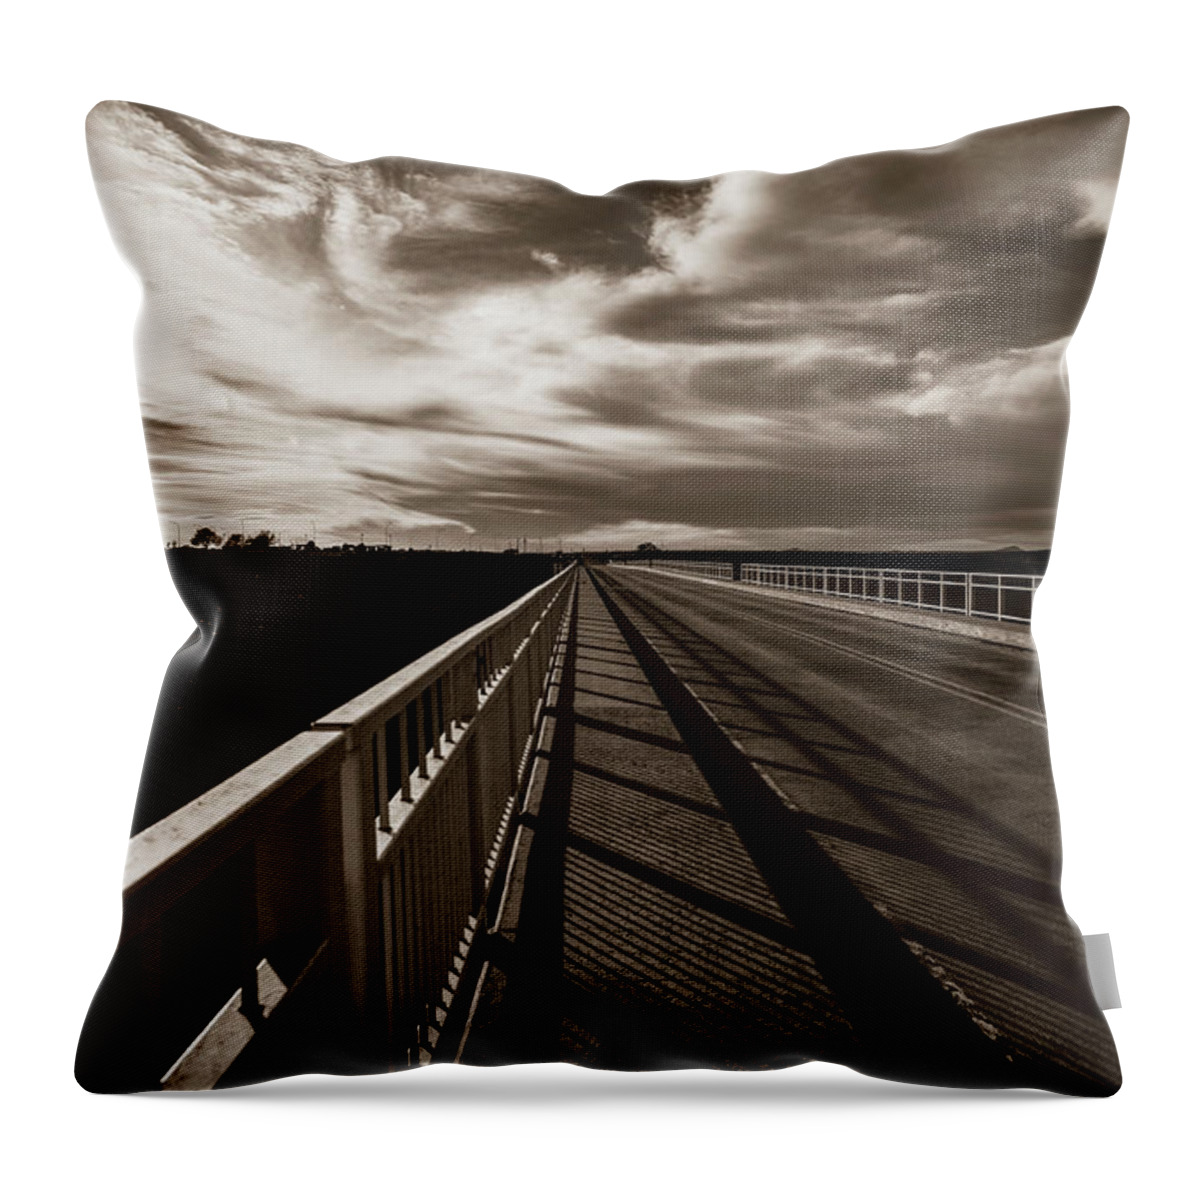 Infinity Throw Pillow featuring the photograph Infinity by Marilyn Hunt